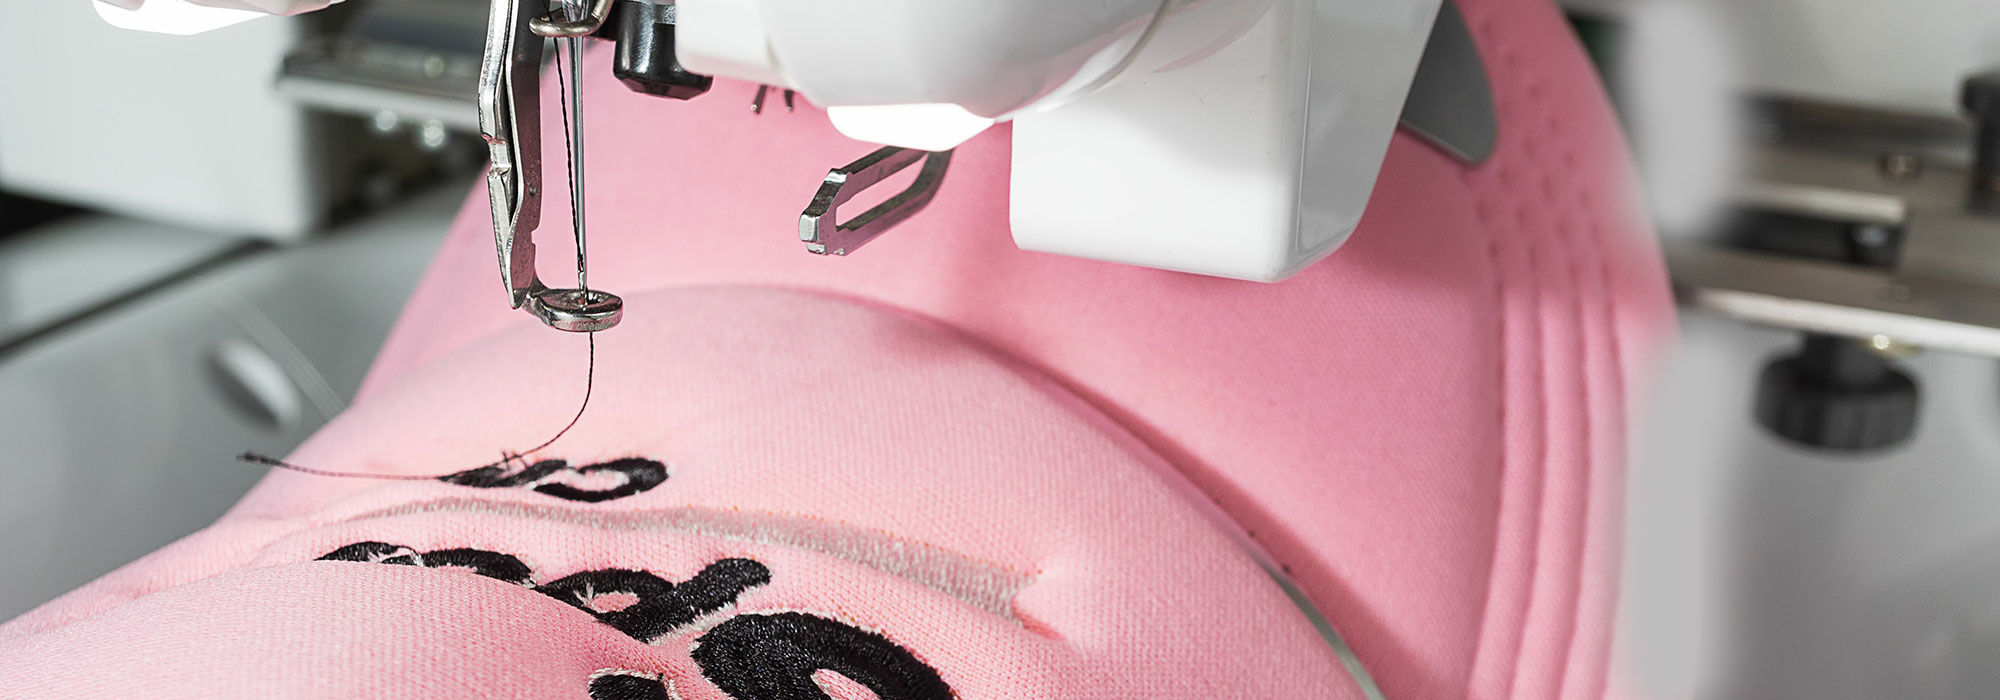 Everything you ever wanted to know about embroidery